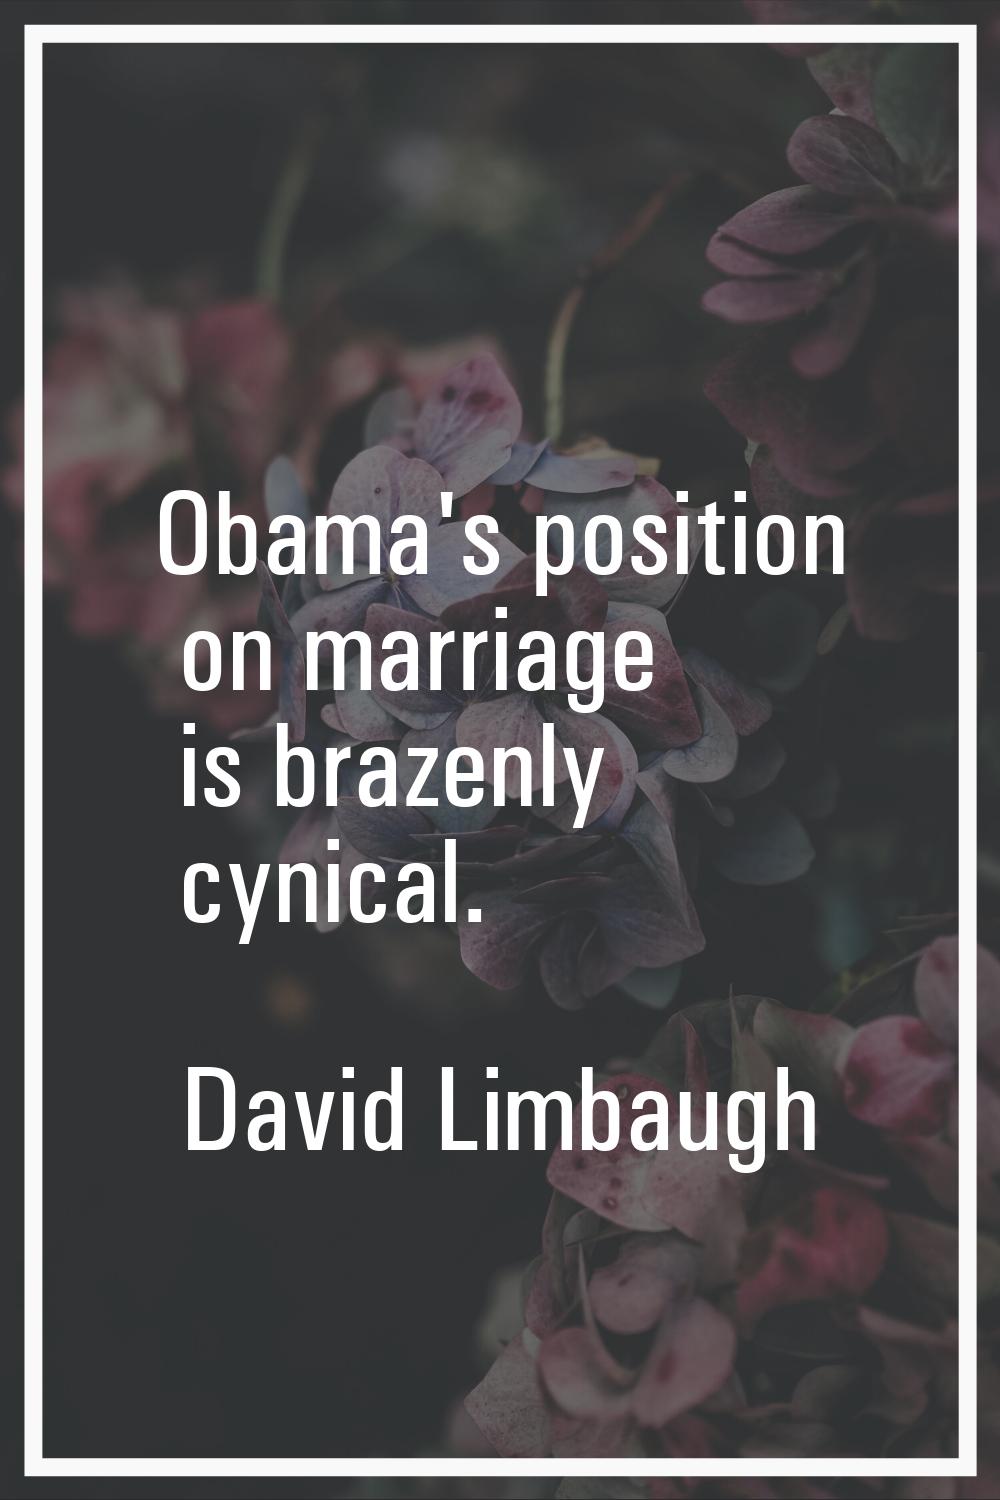 Obama's position on marriage is brazenly cynical.